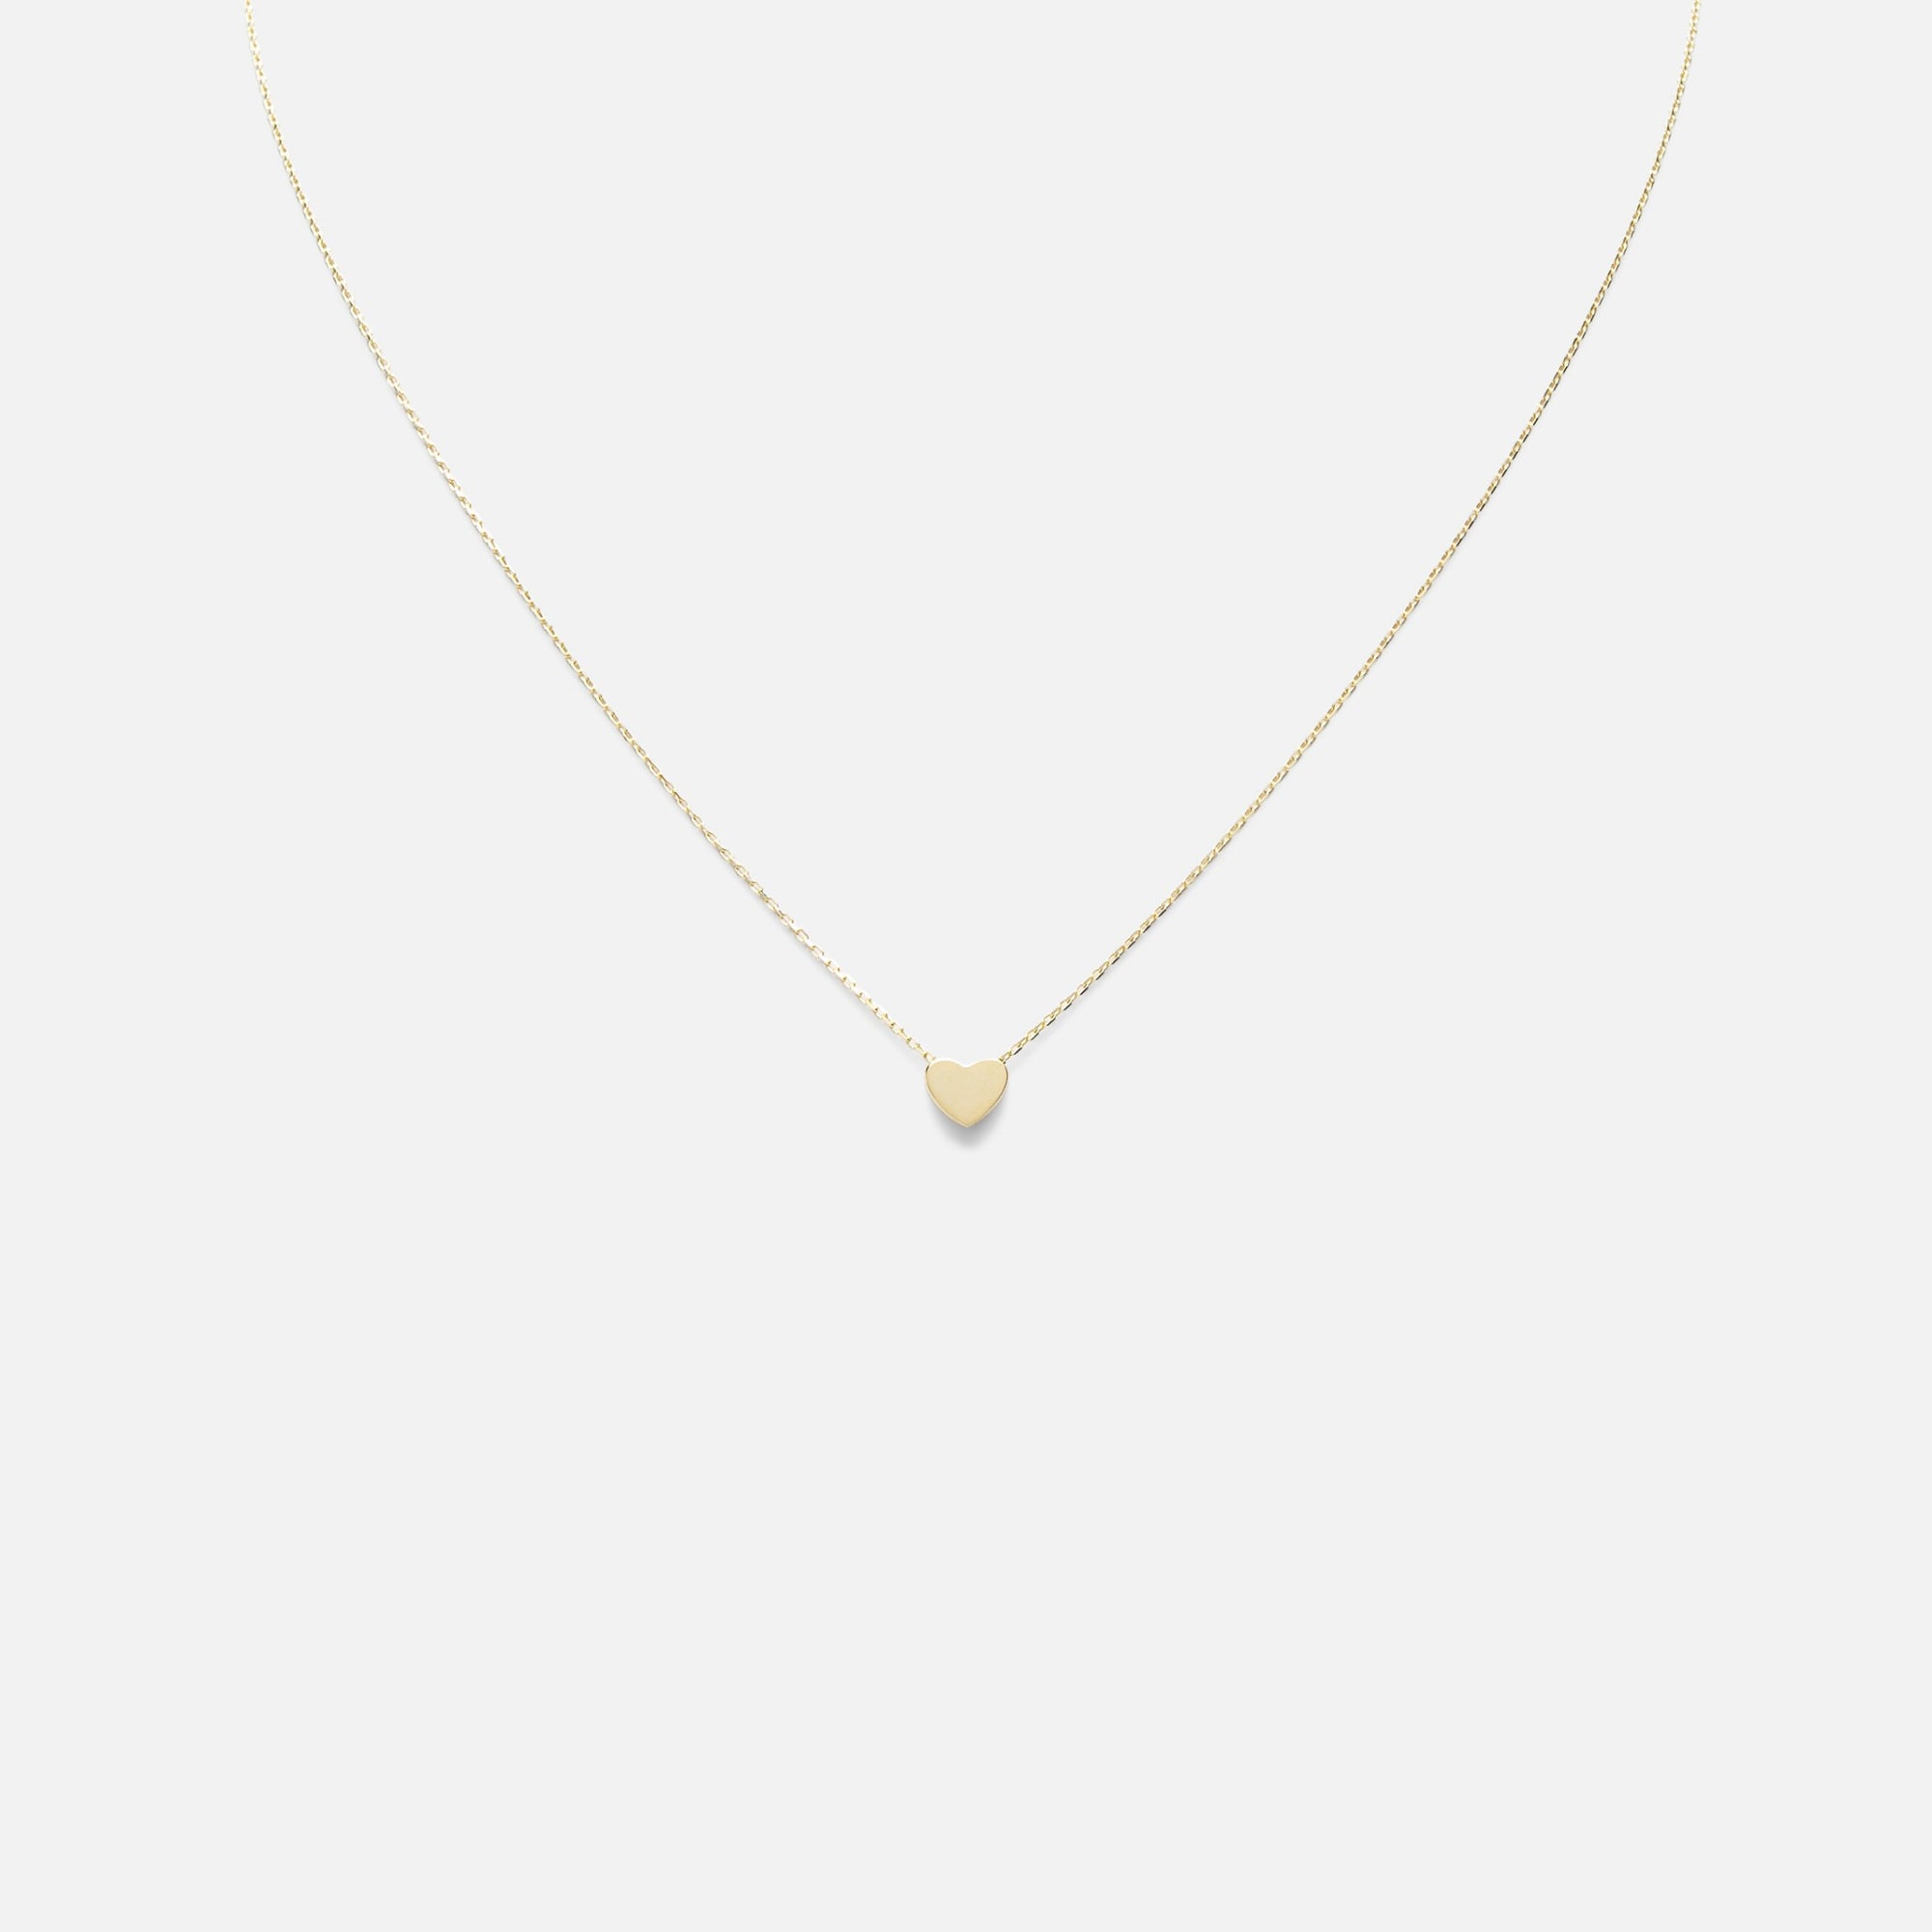 10k yellow gold pendant with small heart 